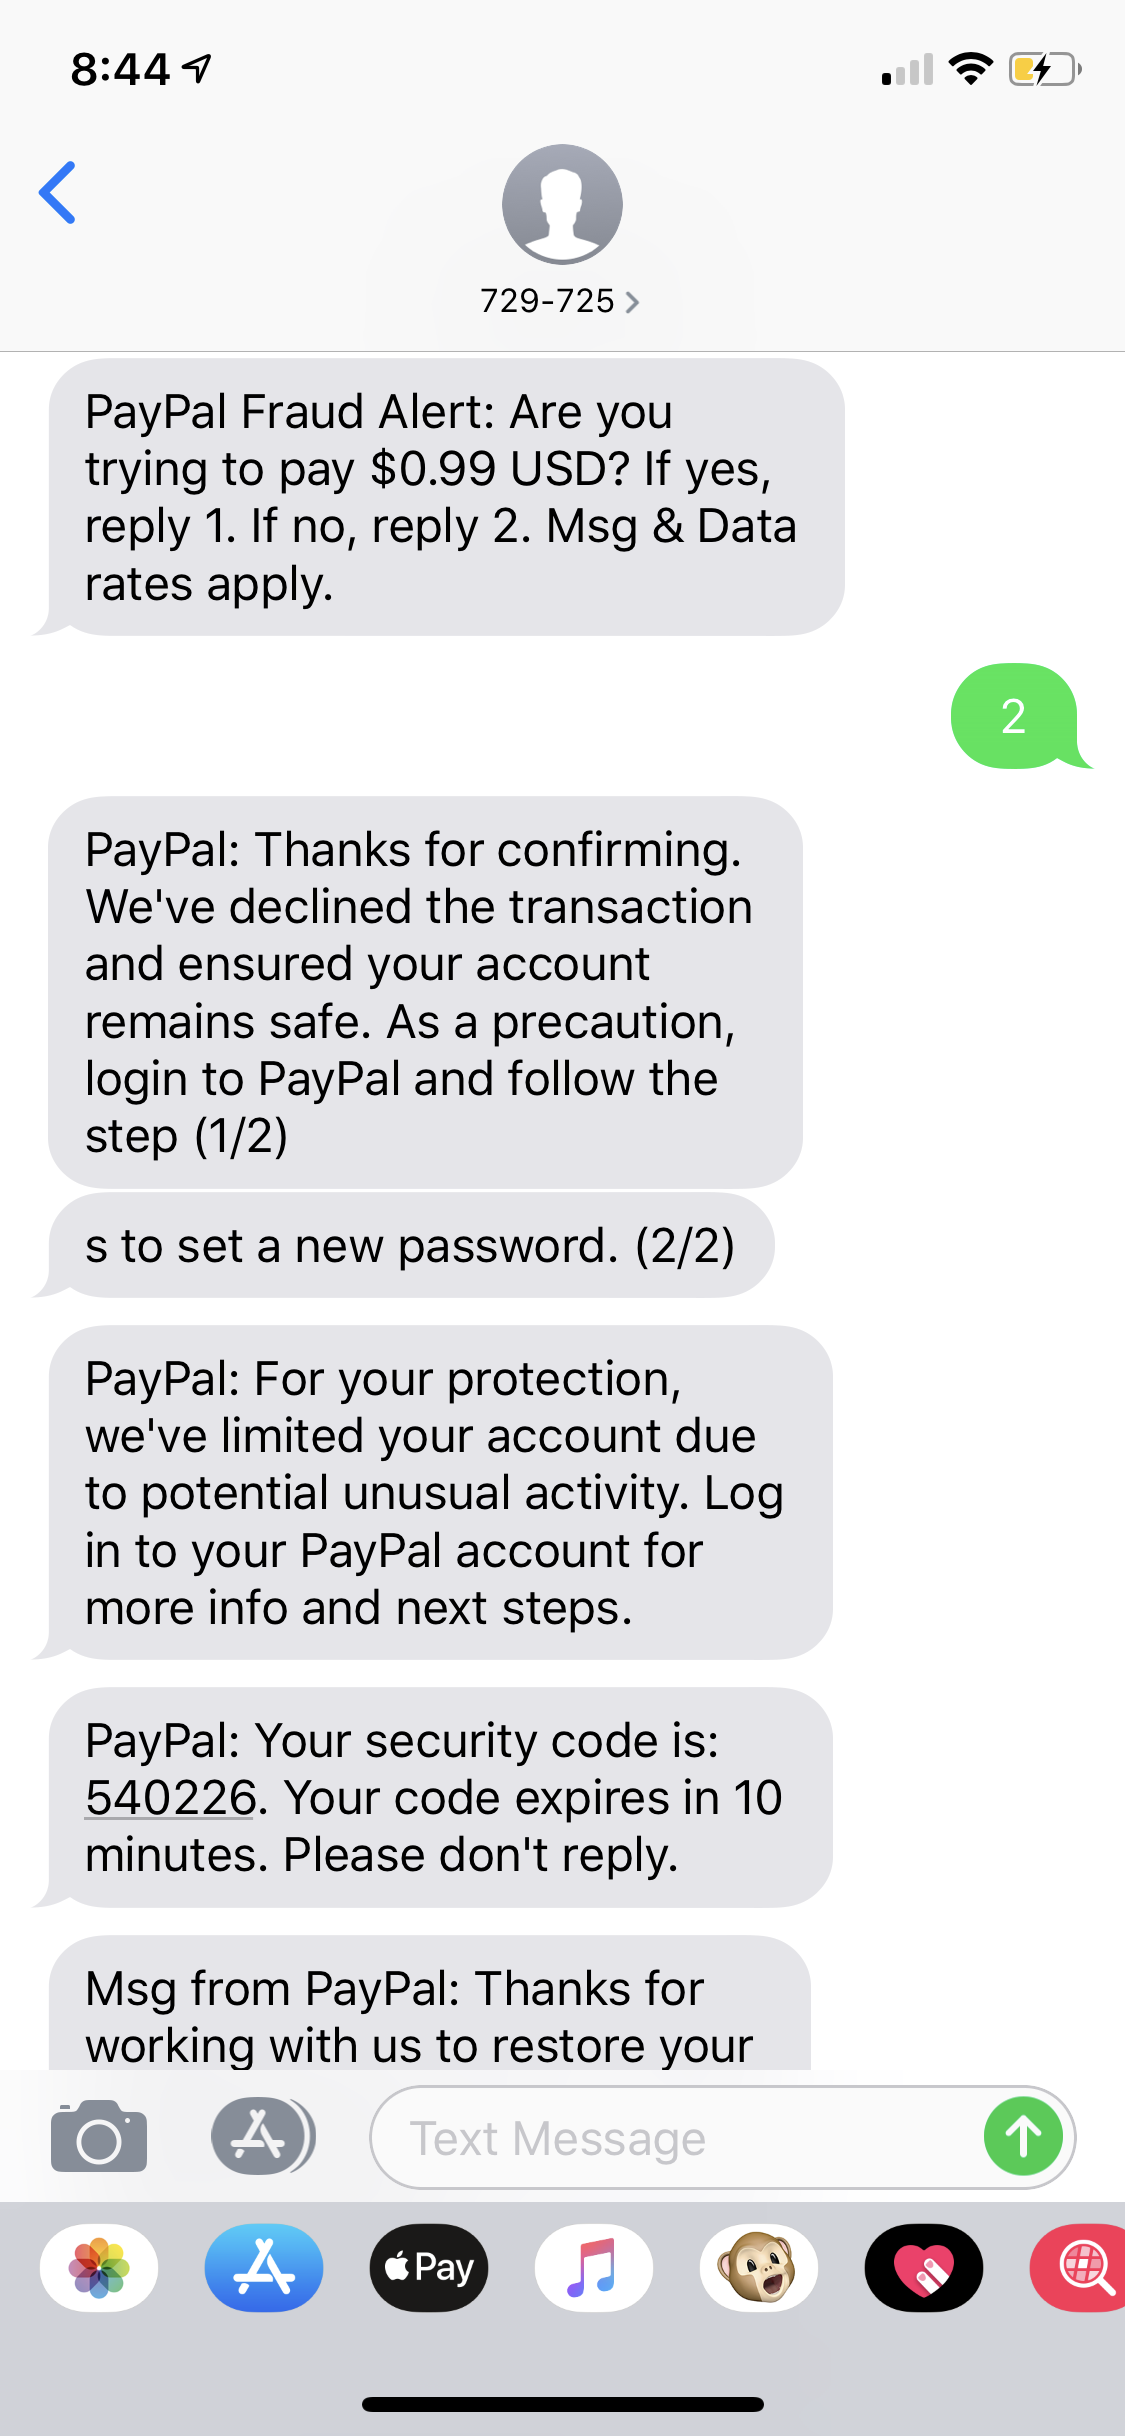 How to Fix Paypal Not Receiving or Sending SMS Verification Code